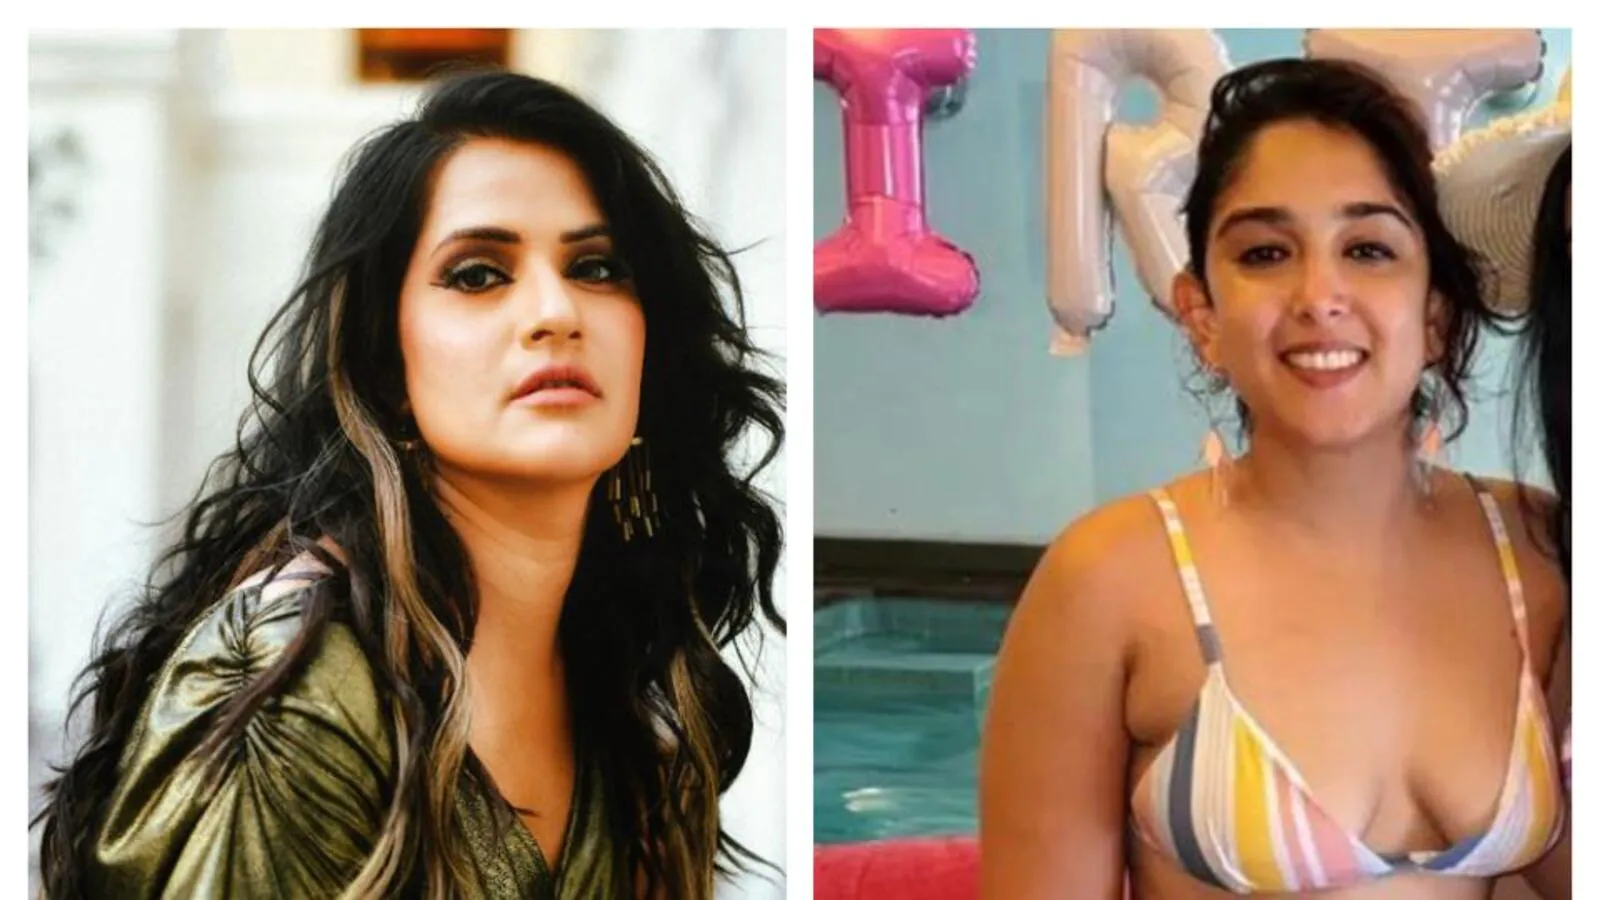 Sona Mohapatra: Normalising shaming of young women for attire encourages misogynistic behaviour